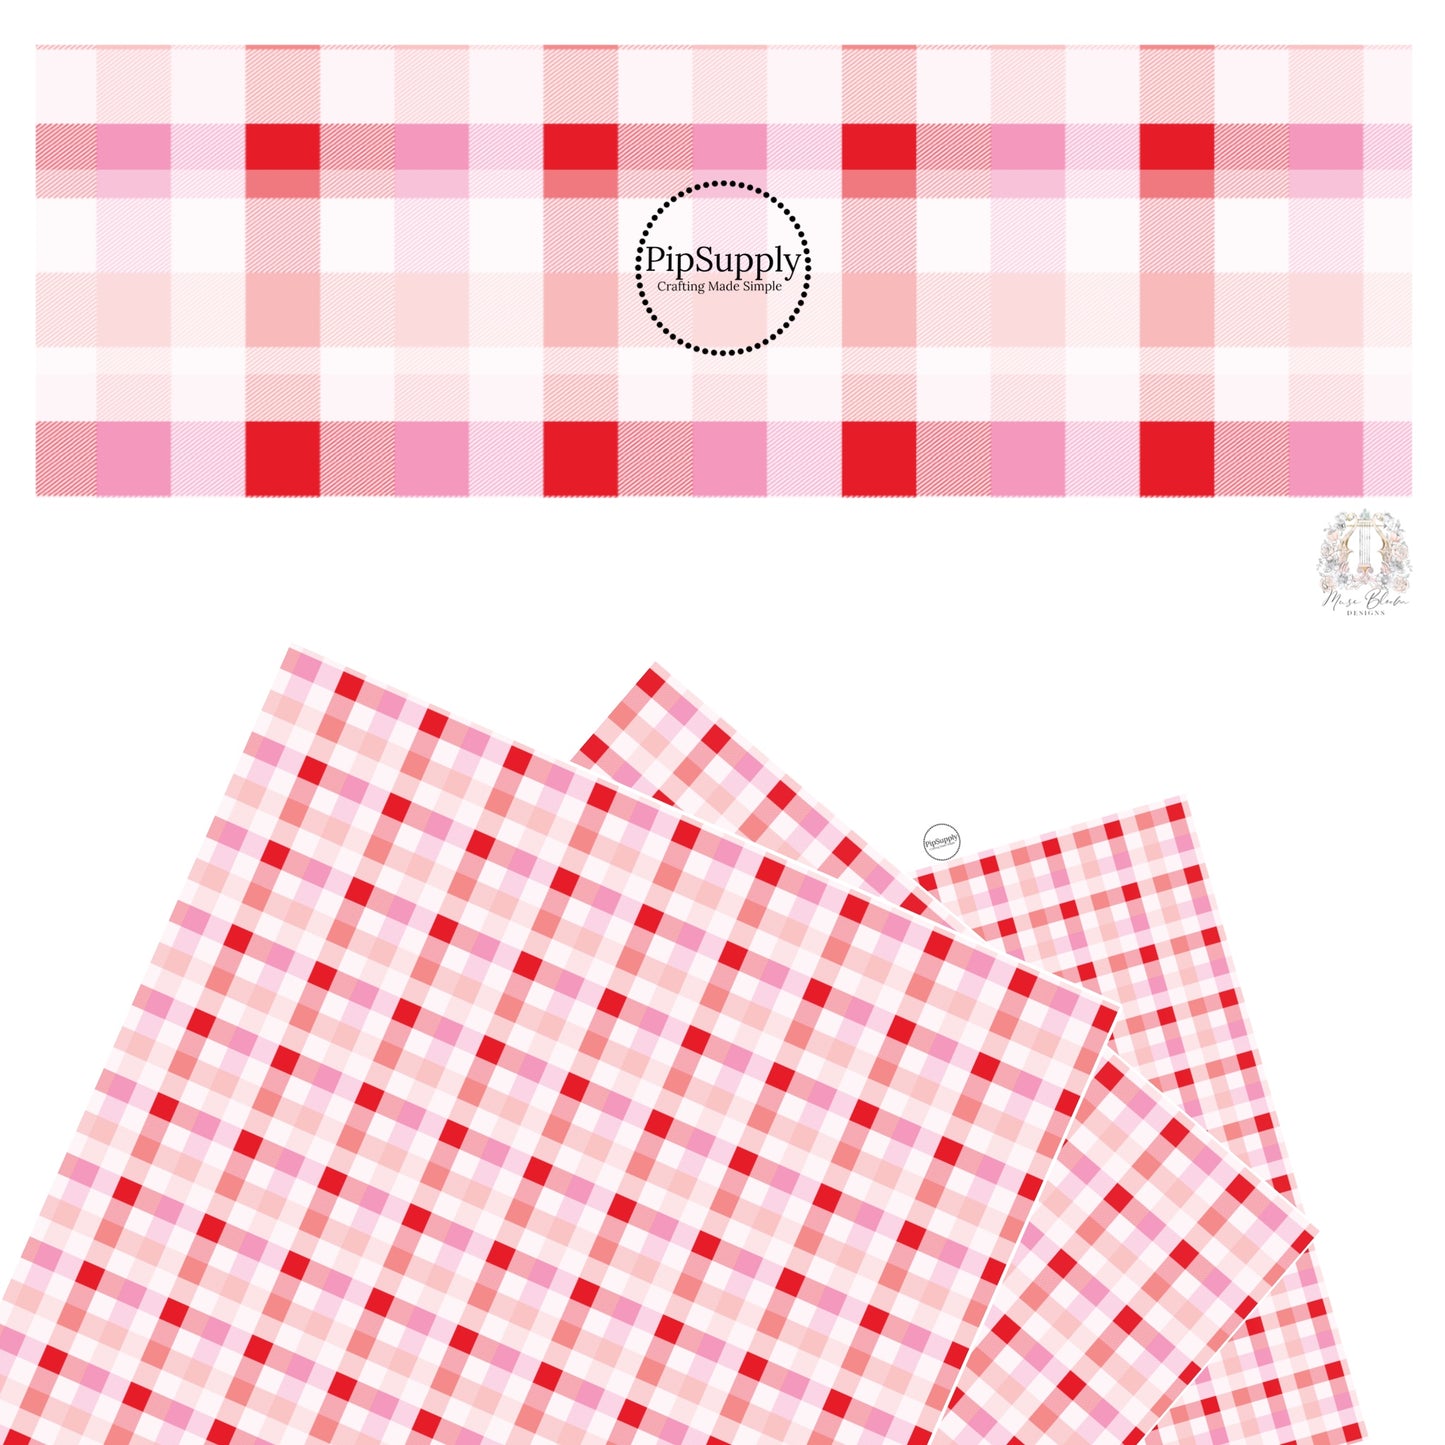 These Valentine's pattern themed faux leather sheets contain the following design elements: red, hot pink, peach, light pink, and white gingham. Our CPSIA compliant faux leather sheets or rolls can be used for all types of crafting projects.